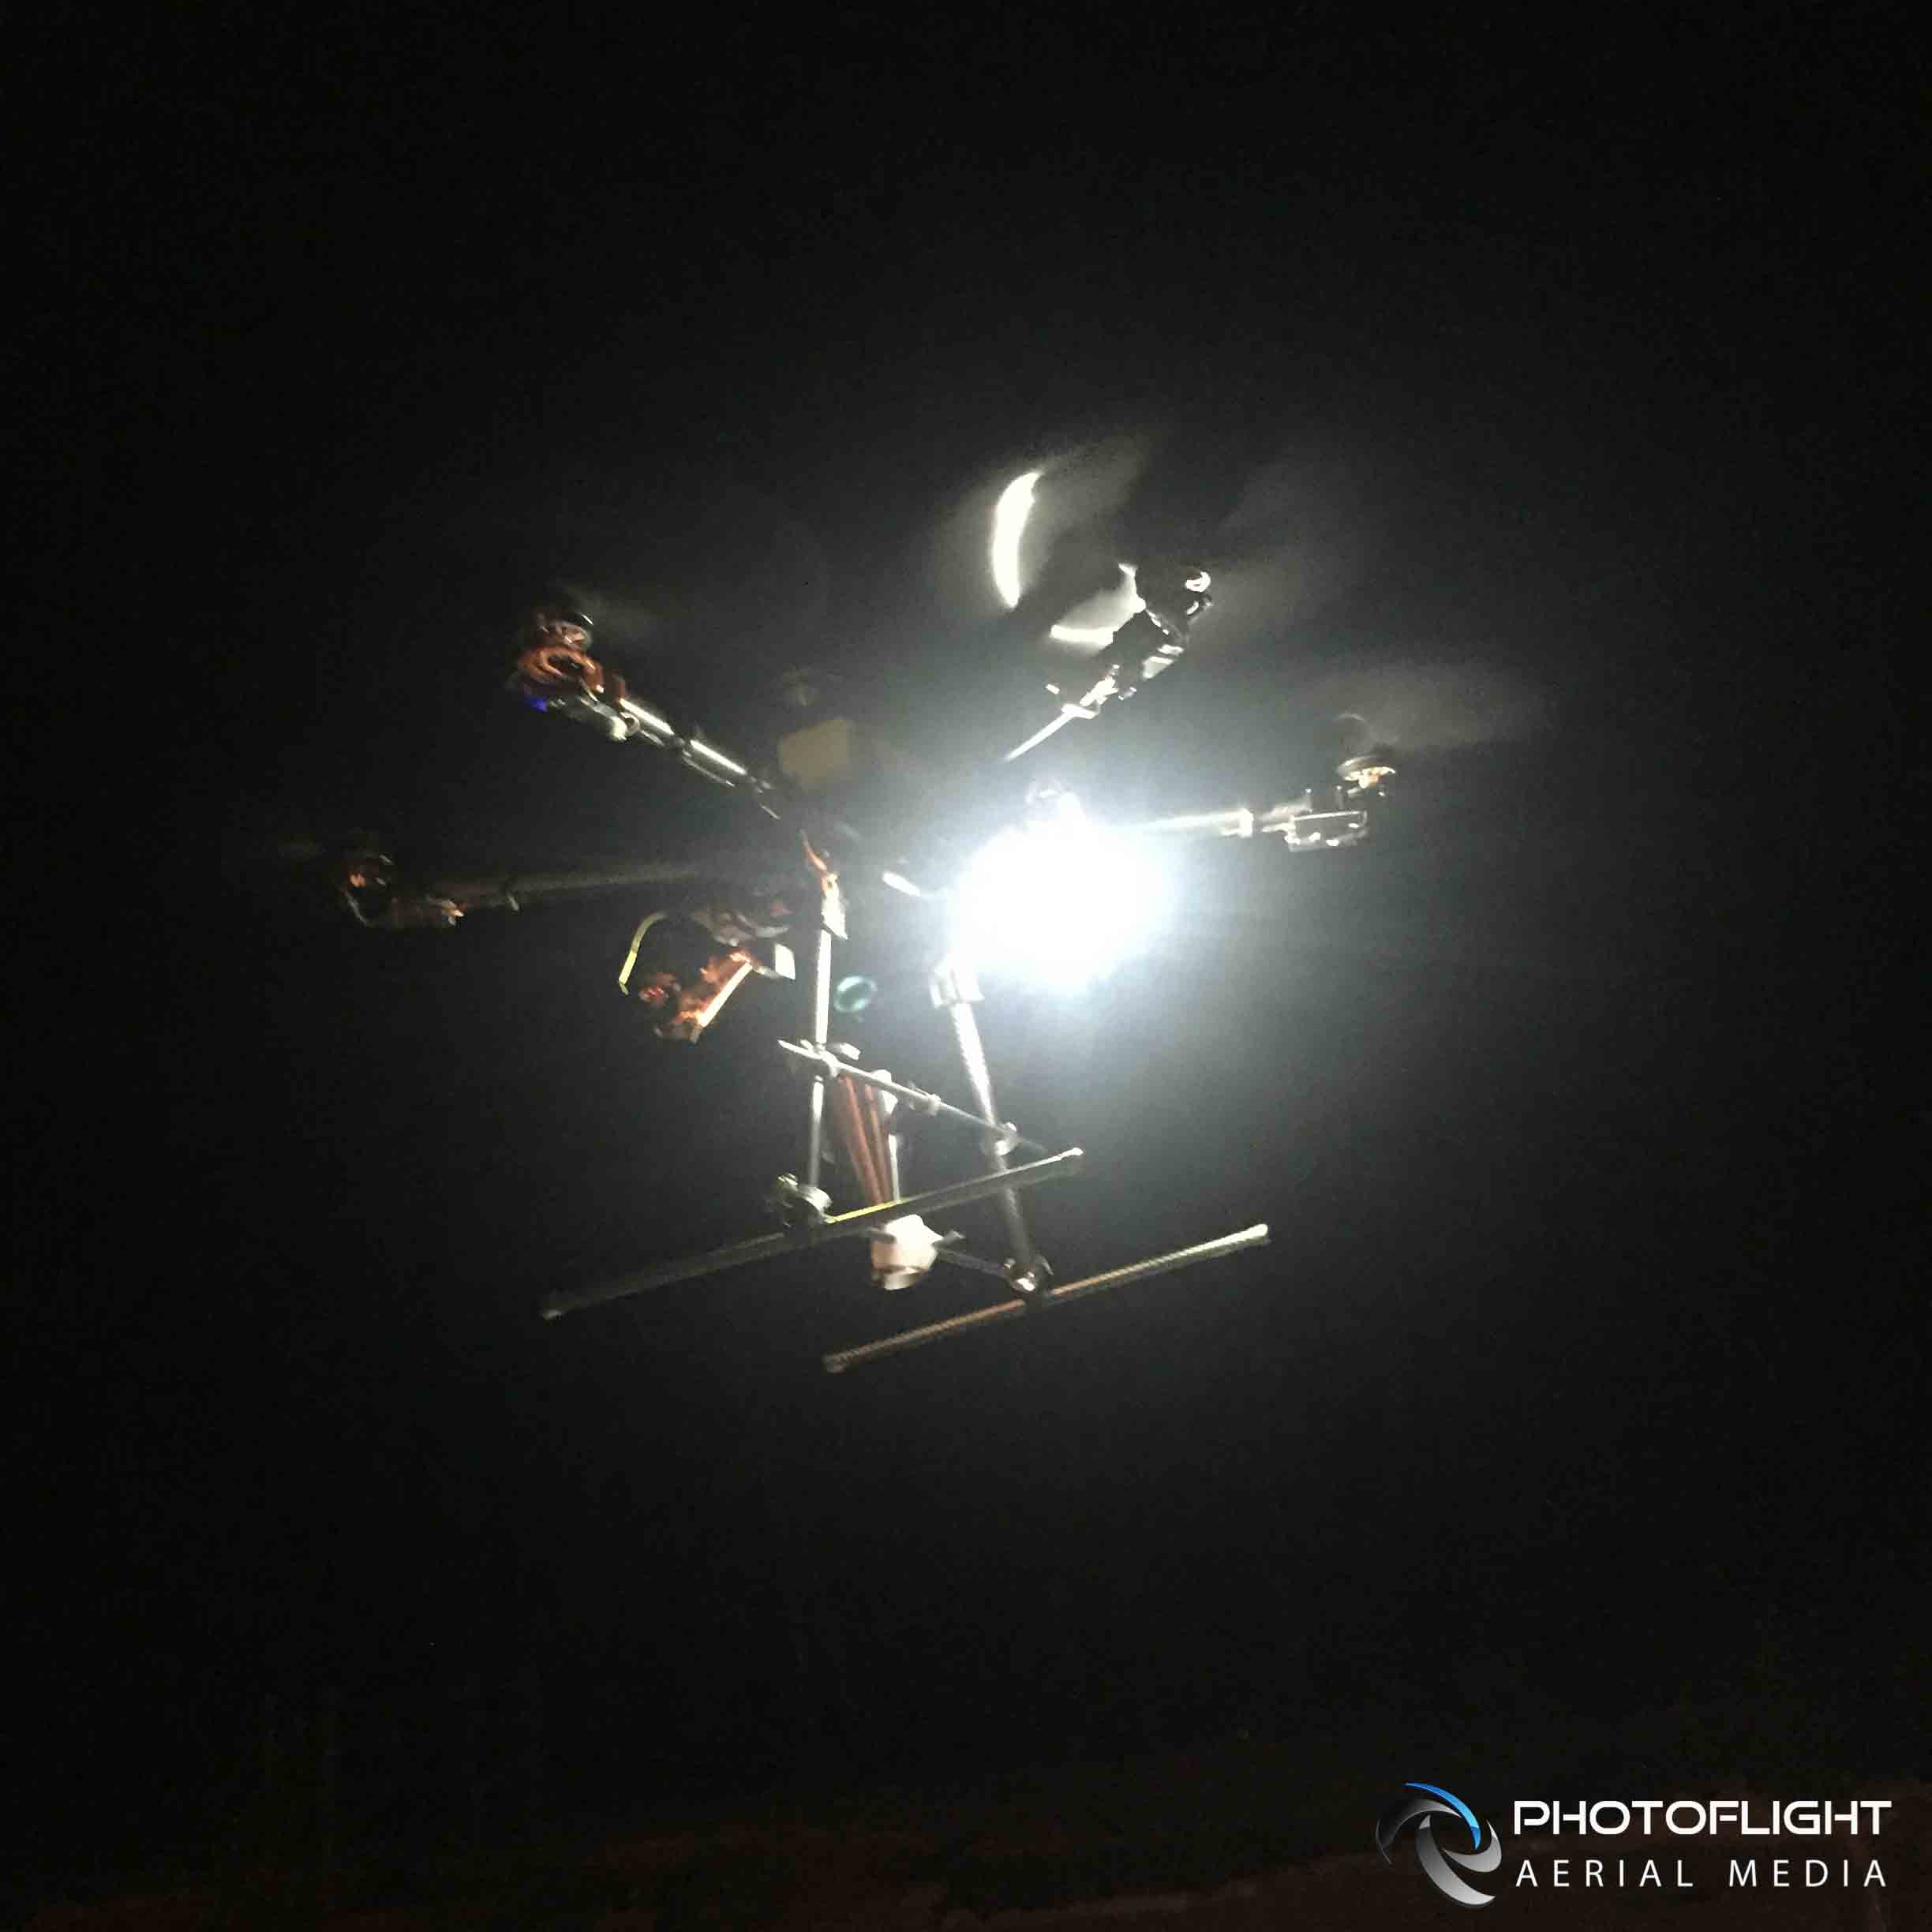 What Do Drones At Night Look Like